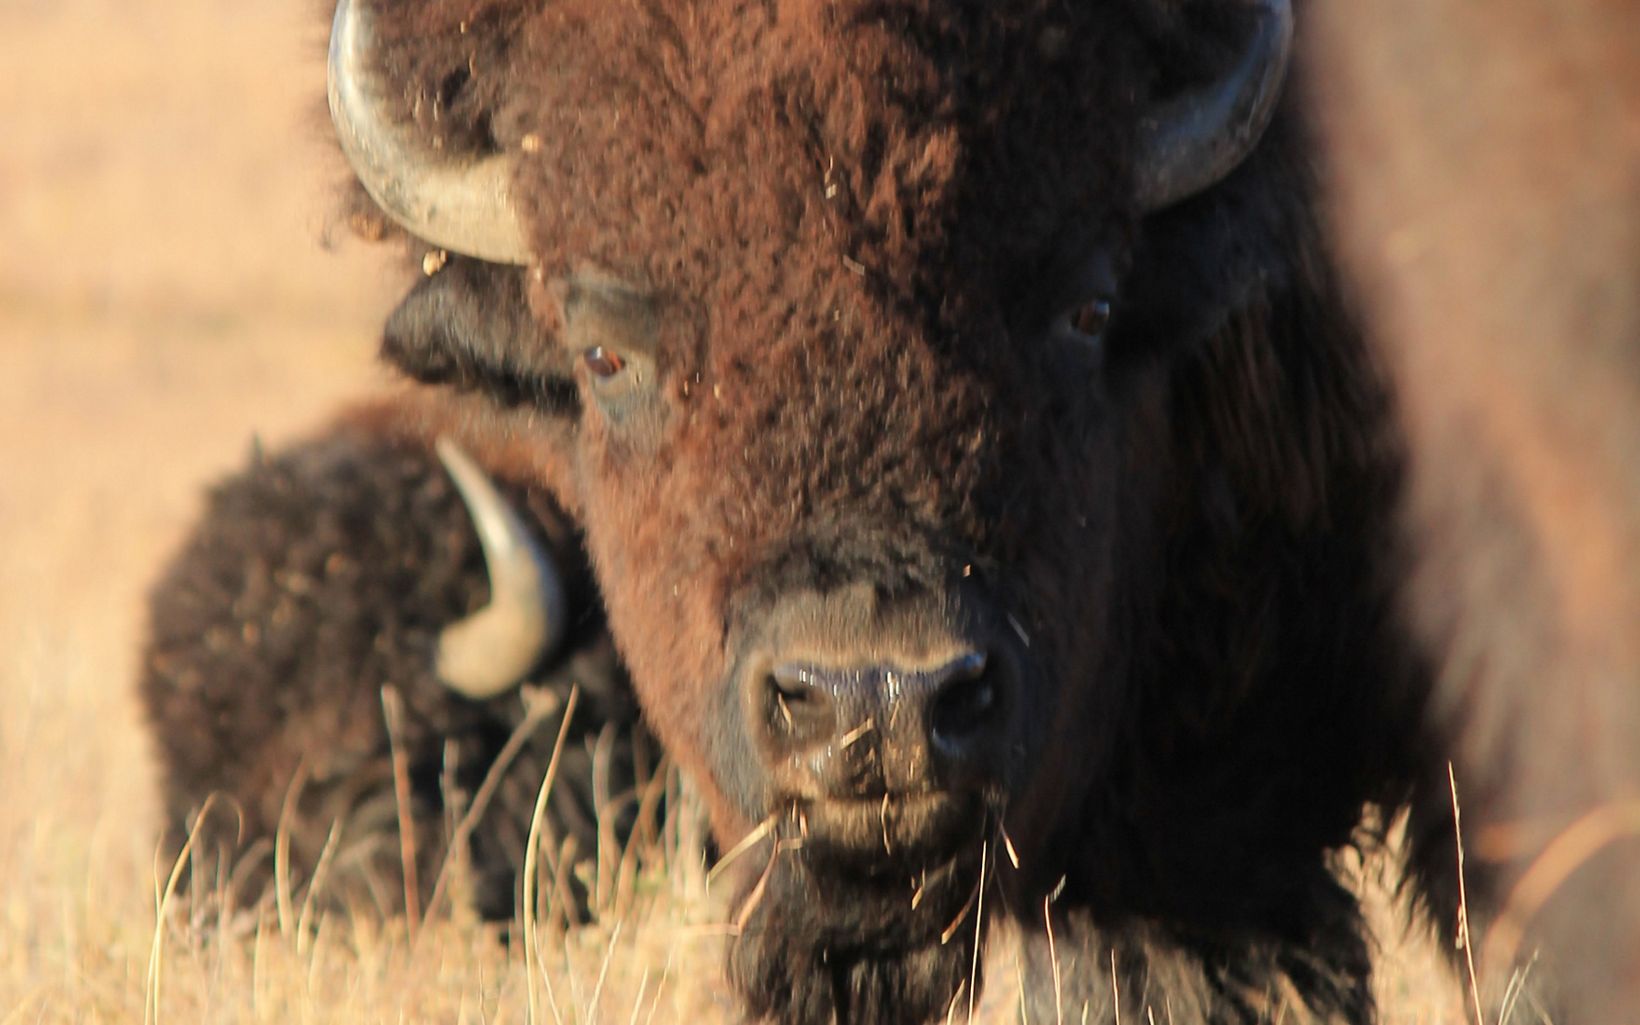 Close up of bison face.